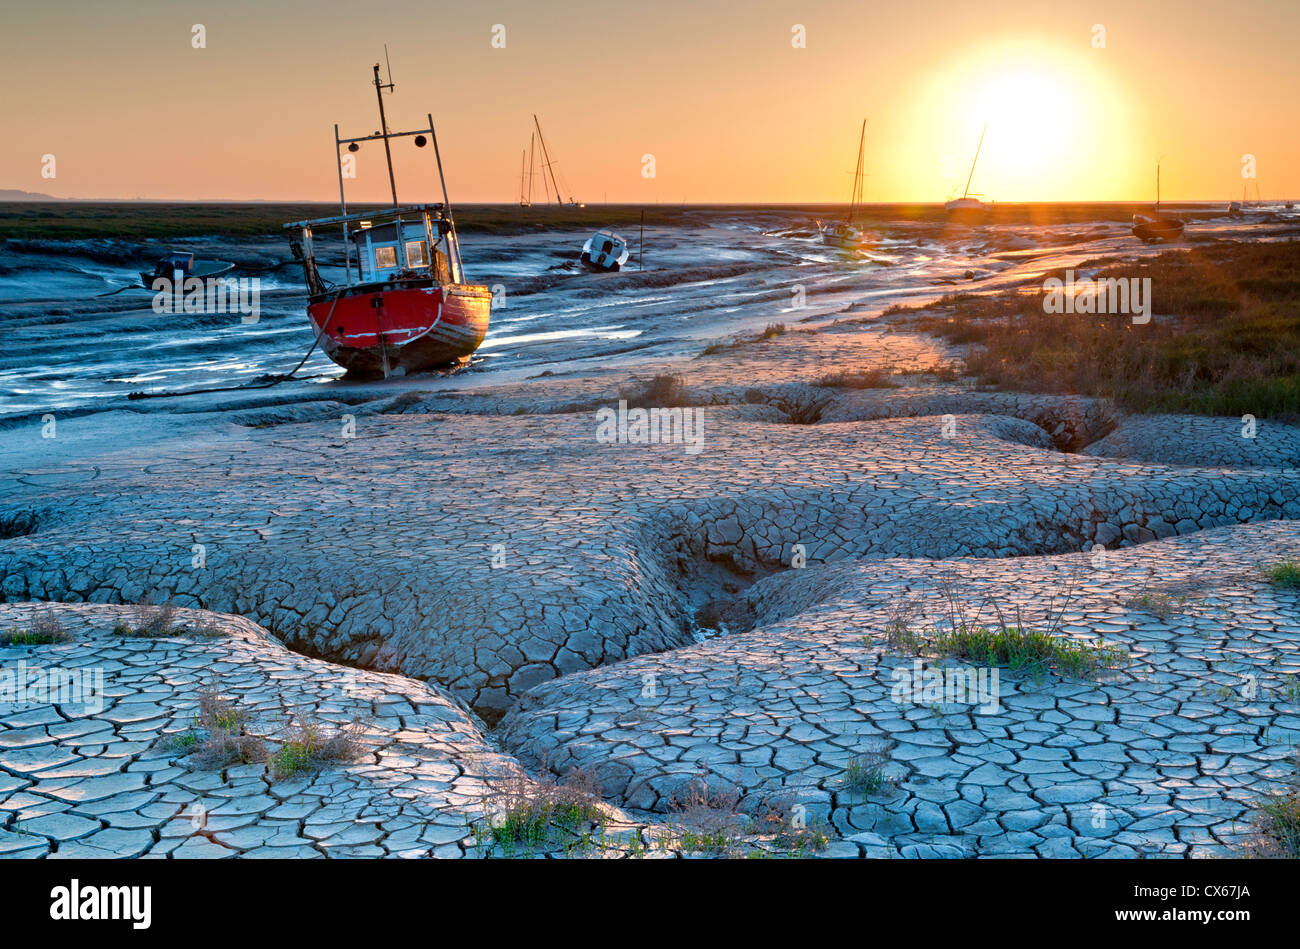 Mud Flats & Fishing Boats at Sunset, Heswall, The Dee Estuary, The Wirral, Merseyside, England, UK Stock Photo